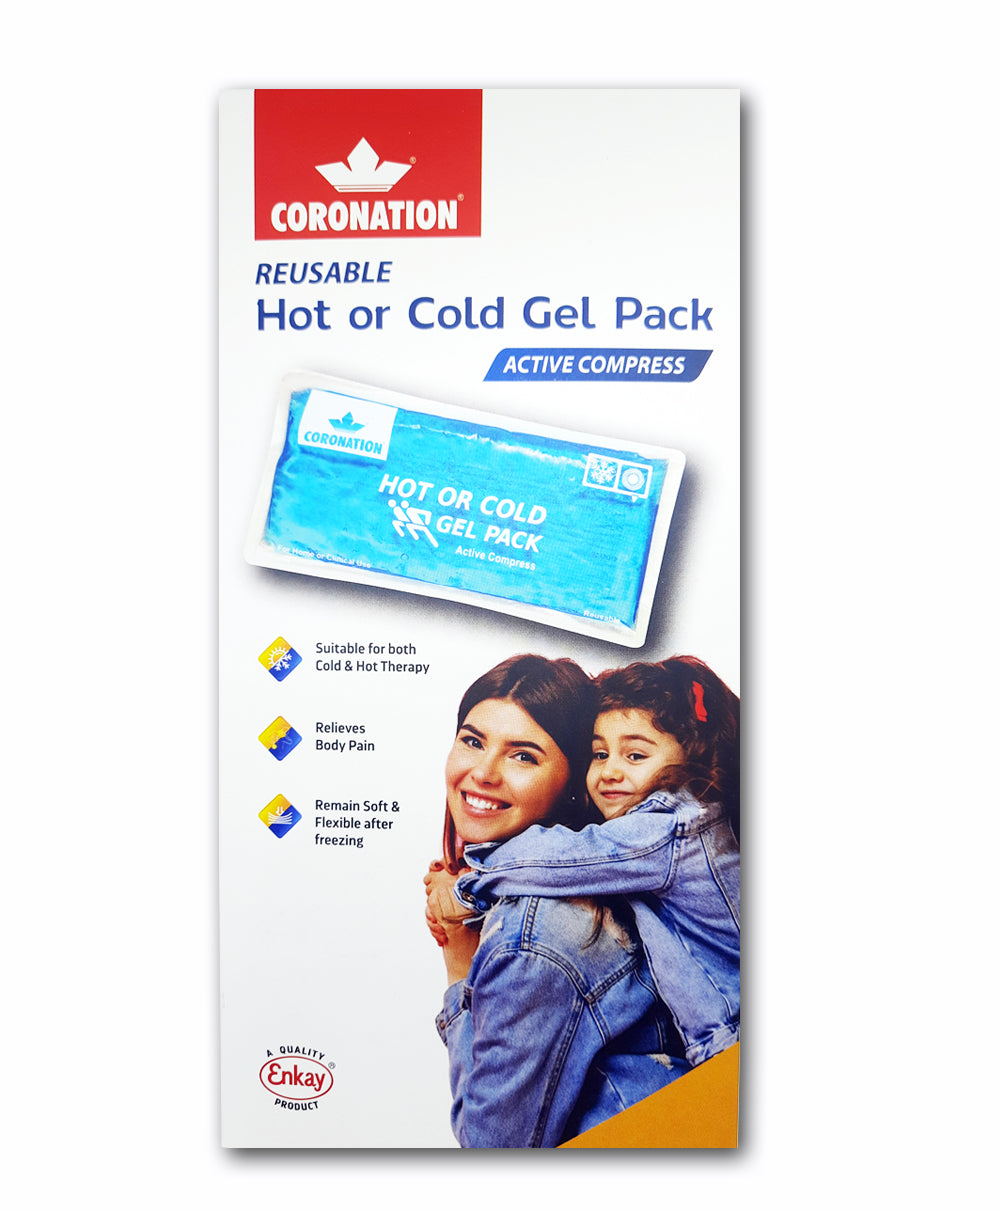 Coronation Hot & Cold Gel Pack - Active Compress